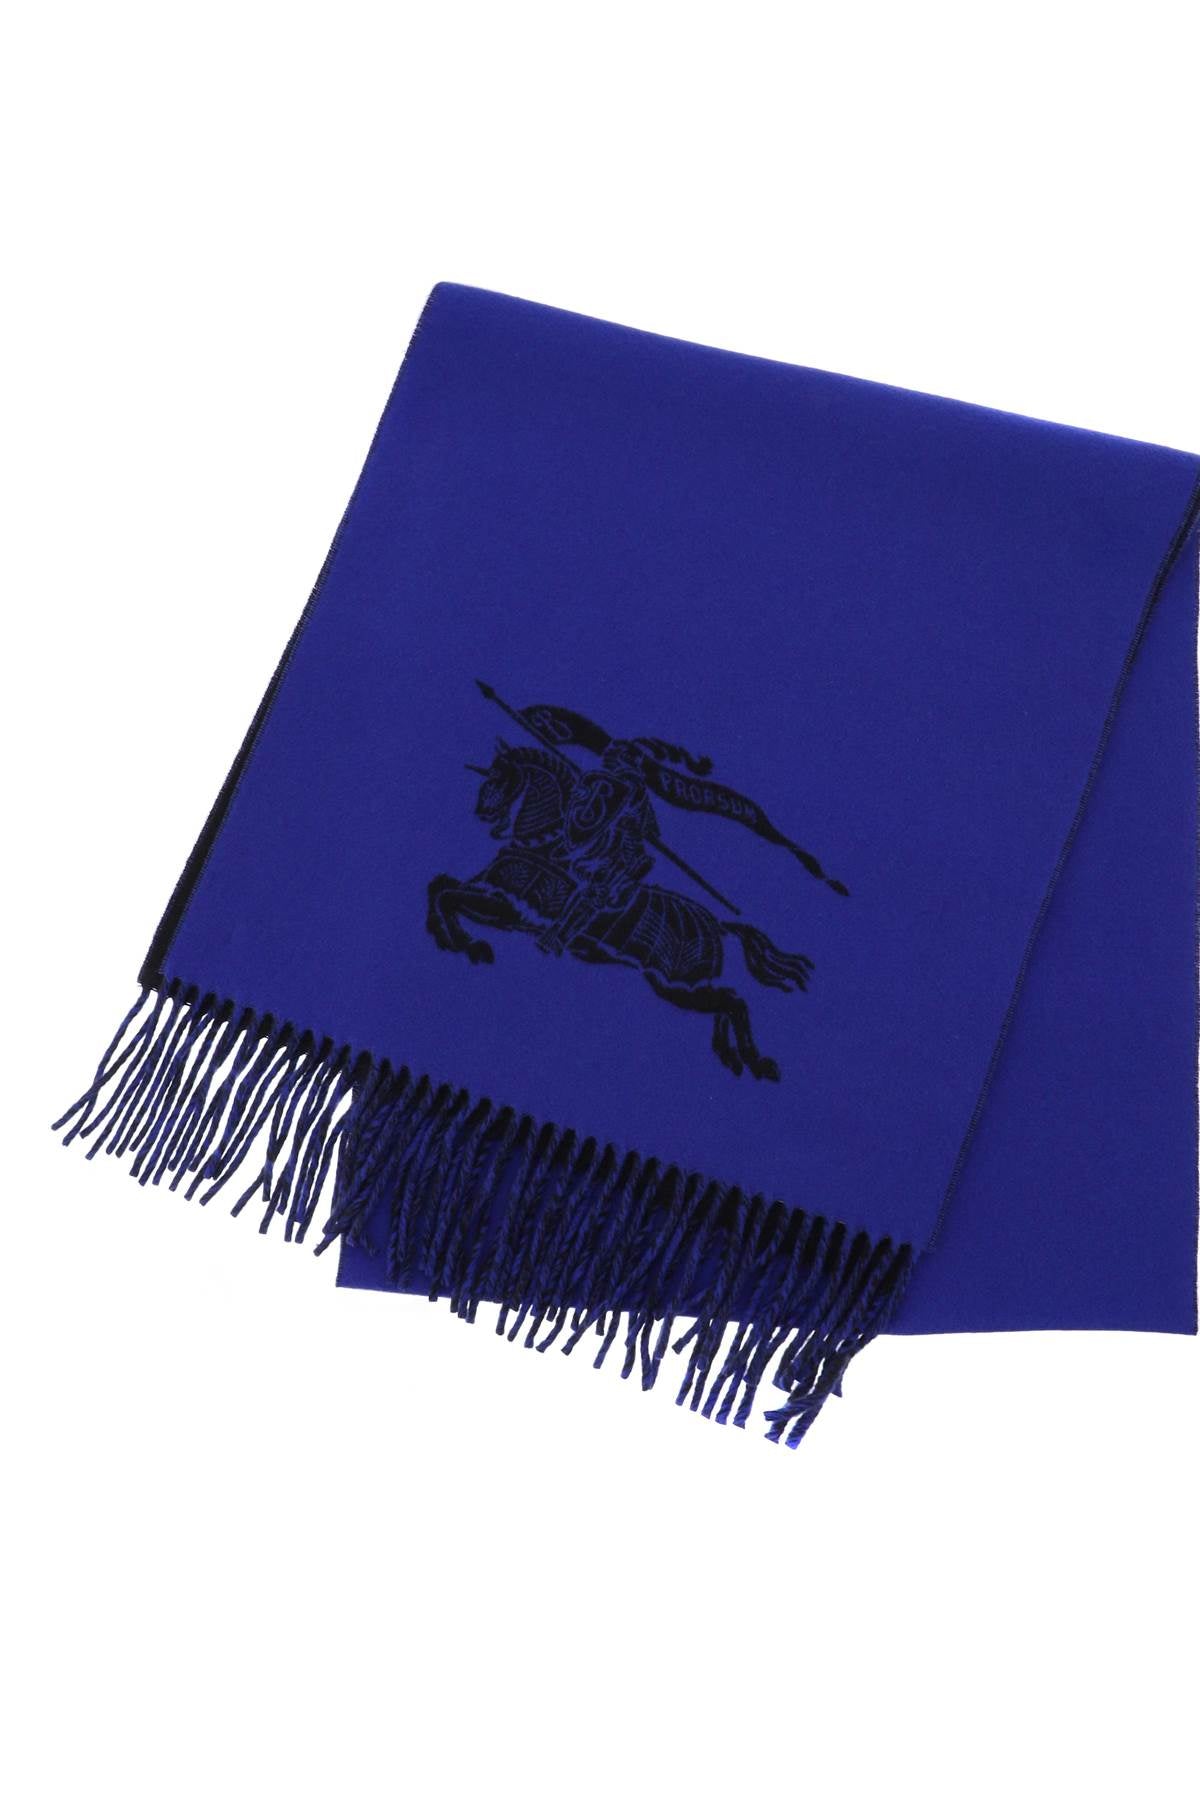 BURBERRY Reversible Cashmere Scarf with Jacquard Equestrian Knight Design for Men